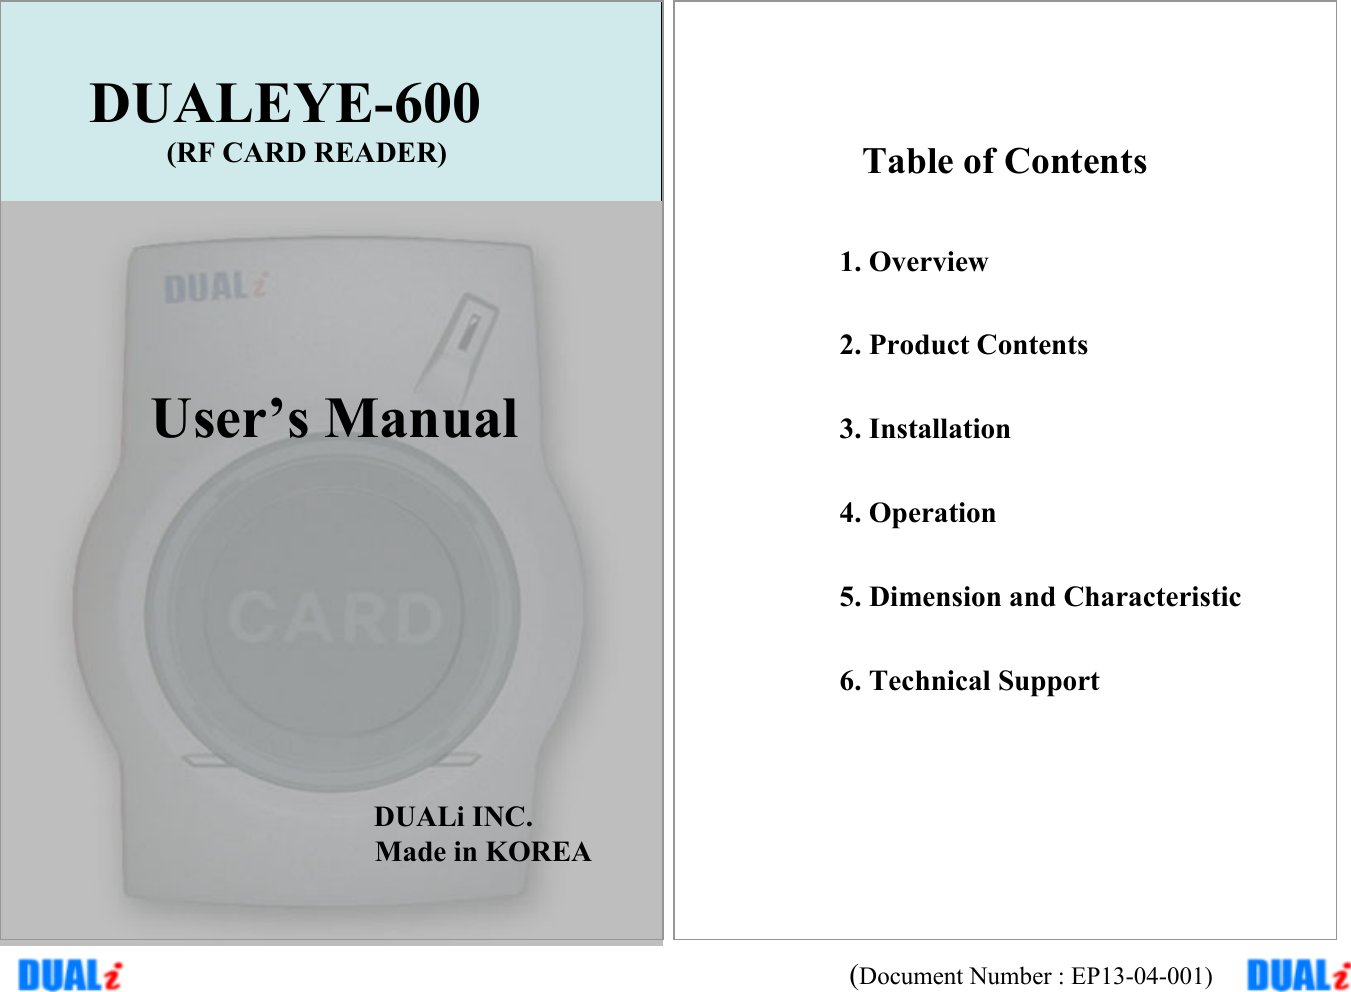 DUALEYE-600(RF CARD READER)User’s ManualDUALi INC.Made in KOREATable of Contents1. Overview2. Product Contents 3. Installation4. Operation 5. Dimension and Characteristic6. Technical Support(Document Number : EP13-04-001)